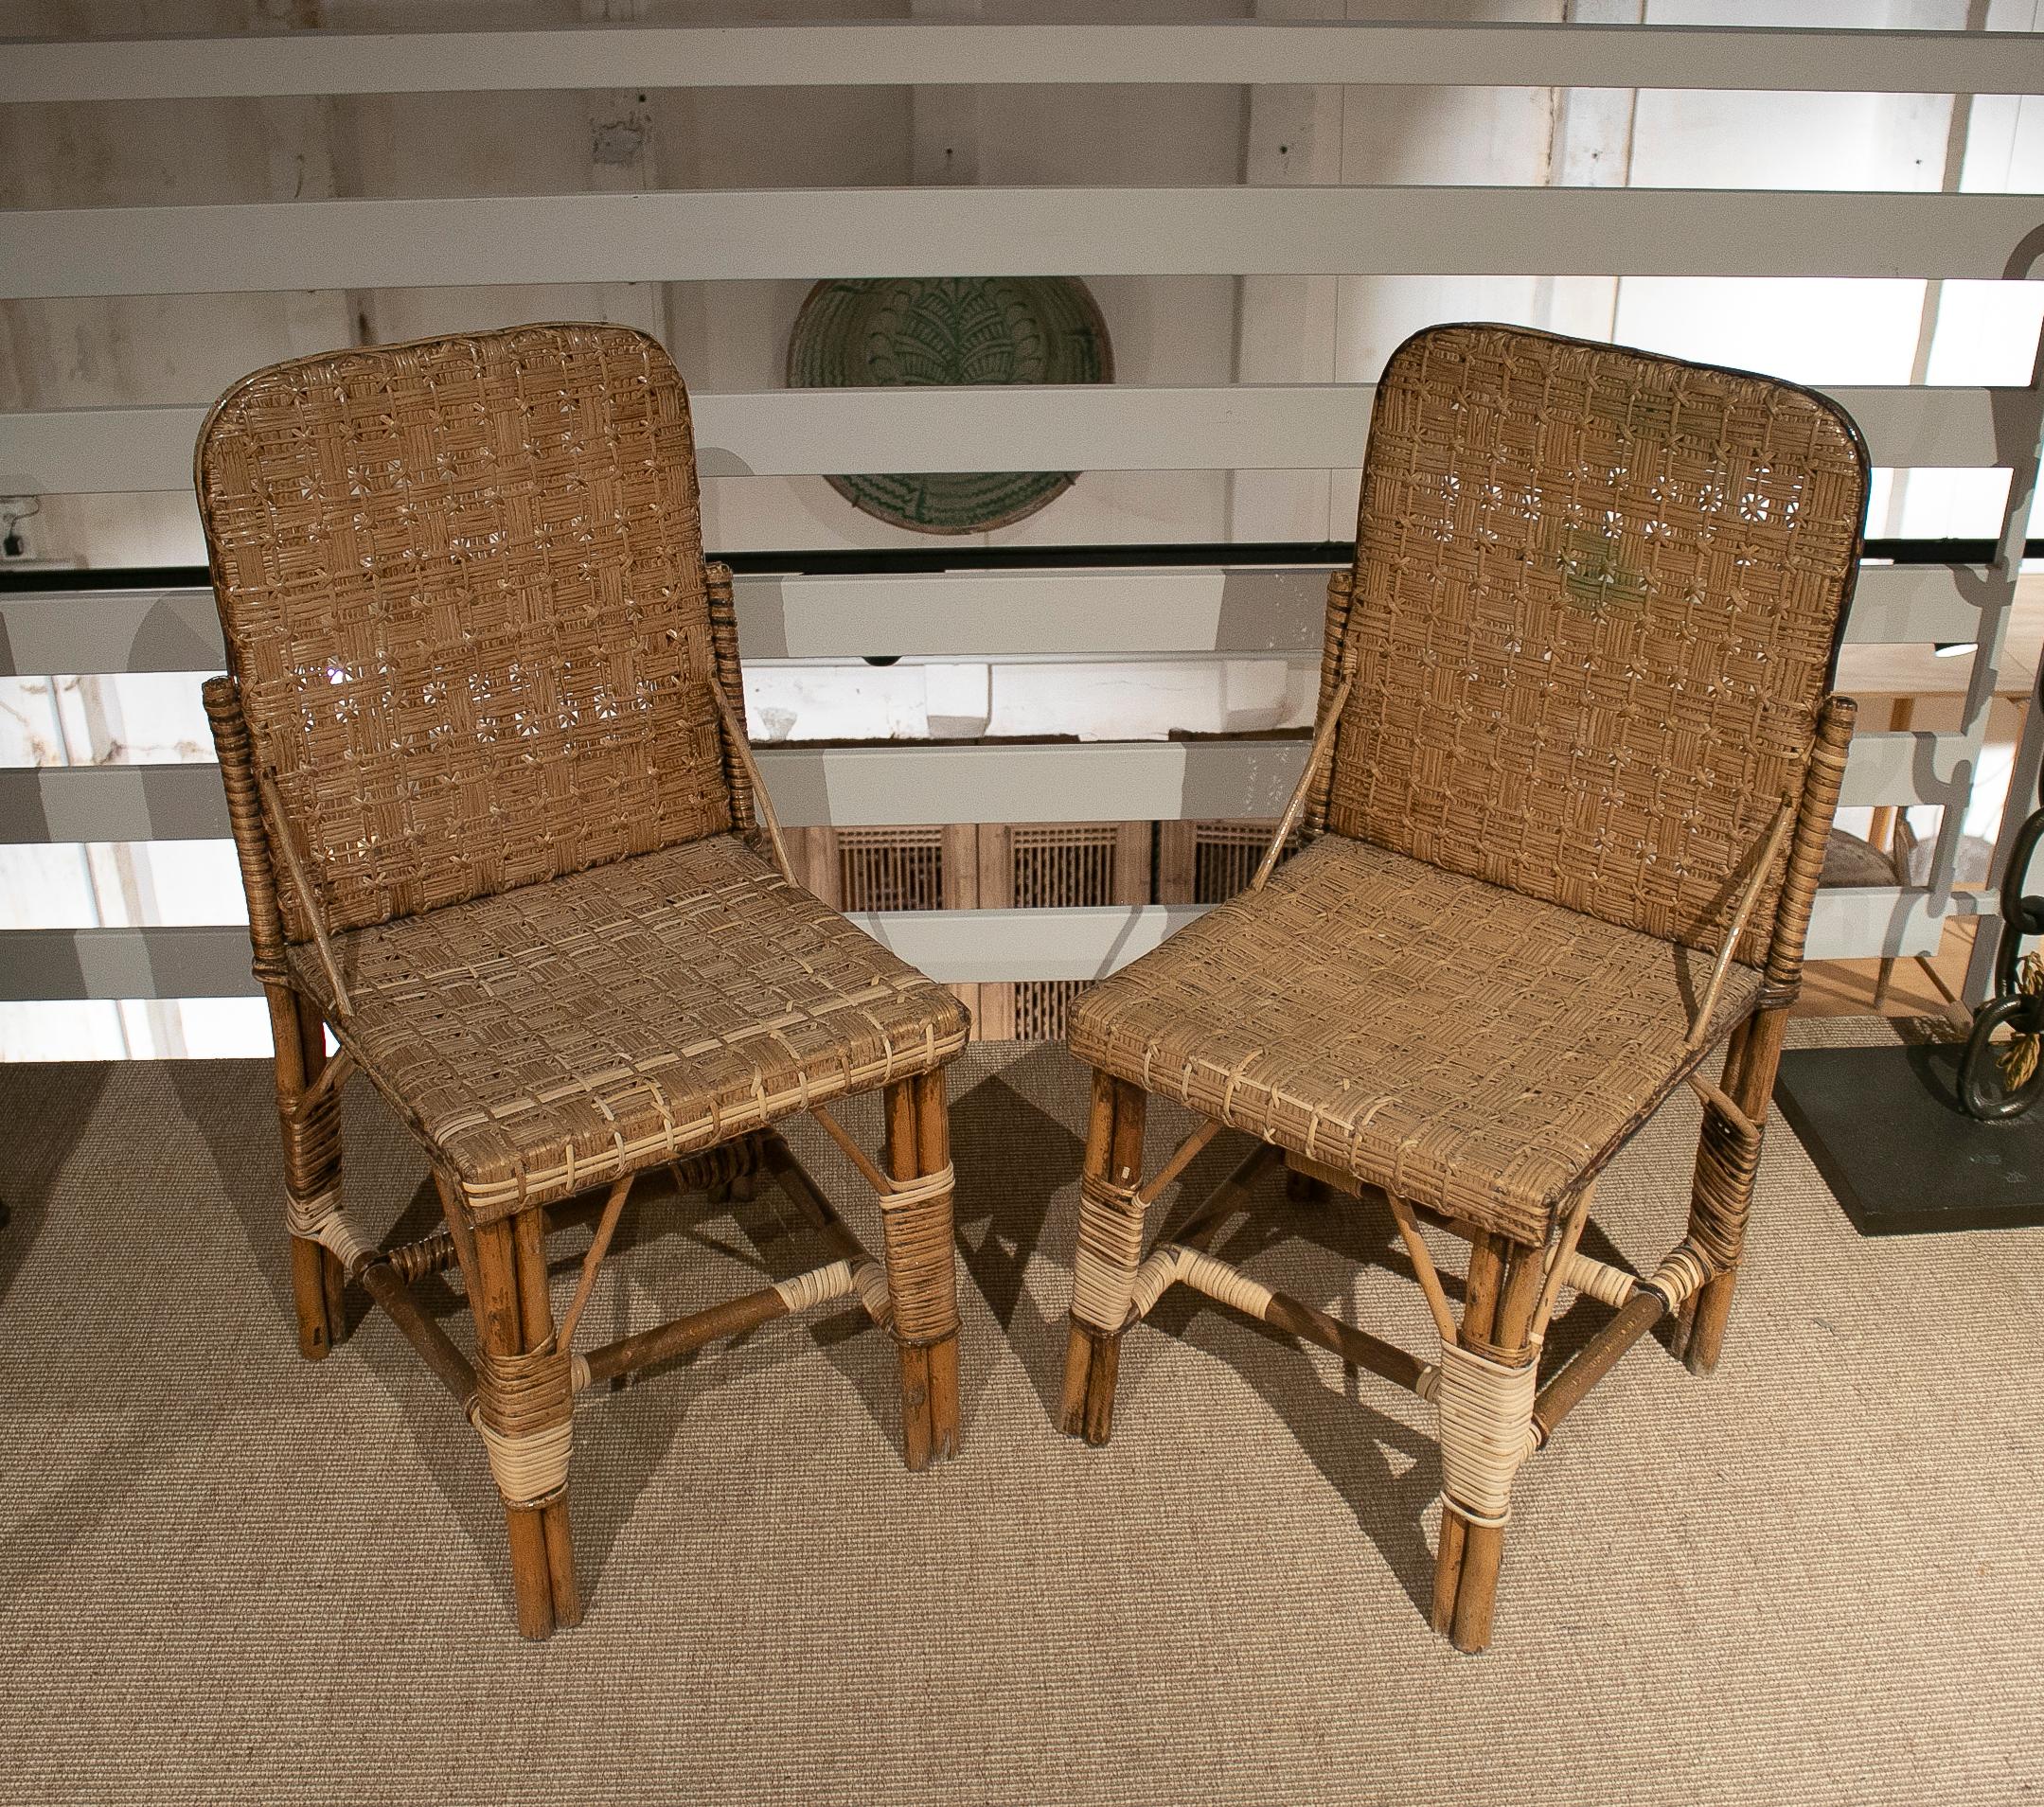 Pair of vintage 1950s Spanish hand woven wicker on wood chairs.